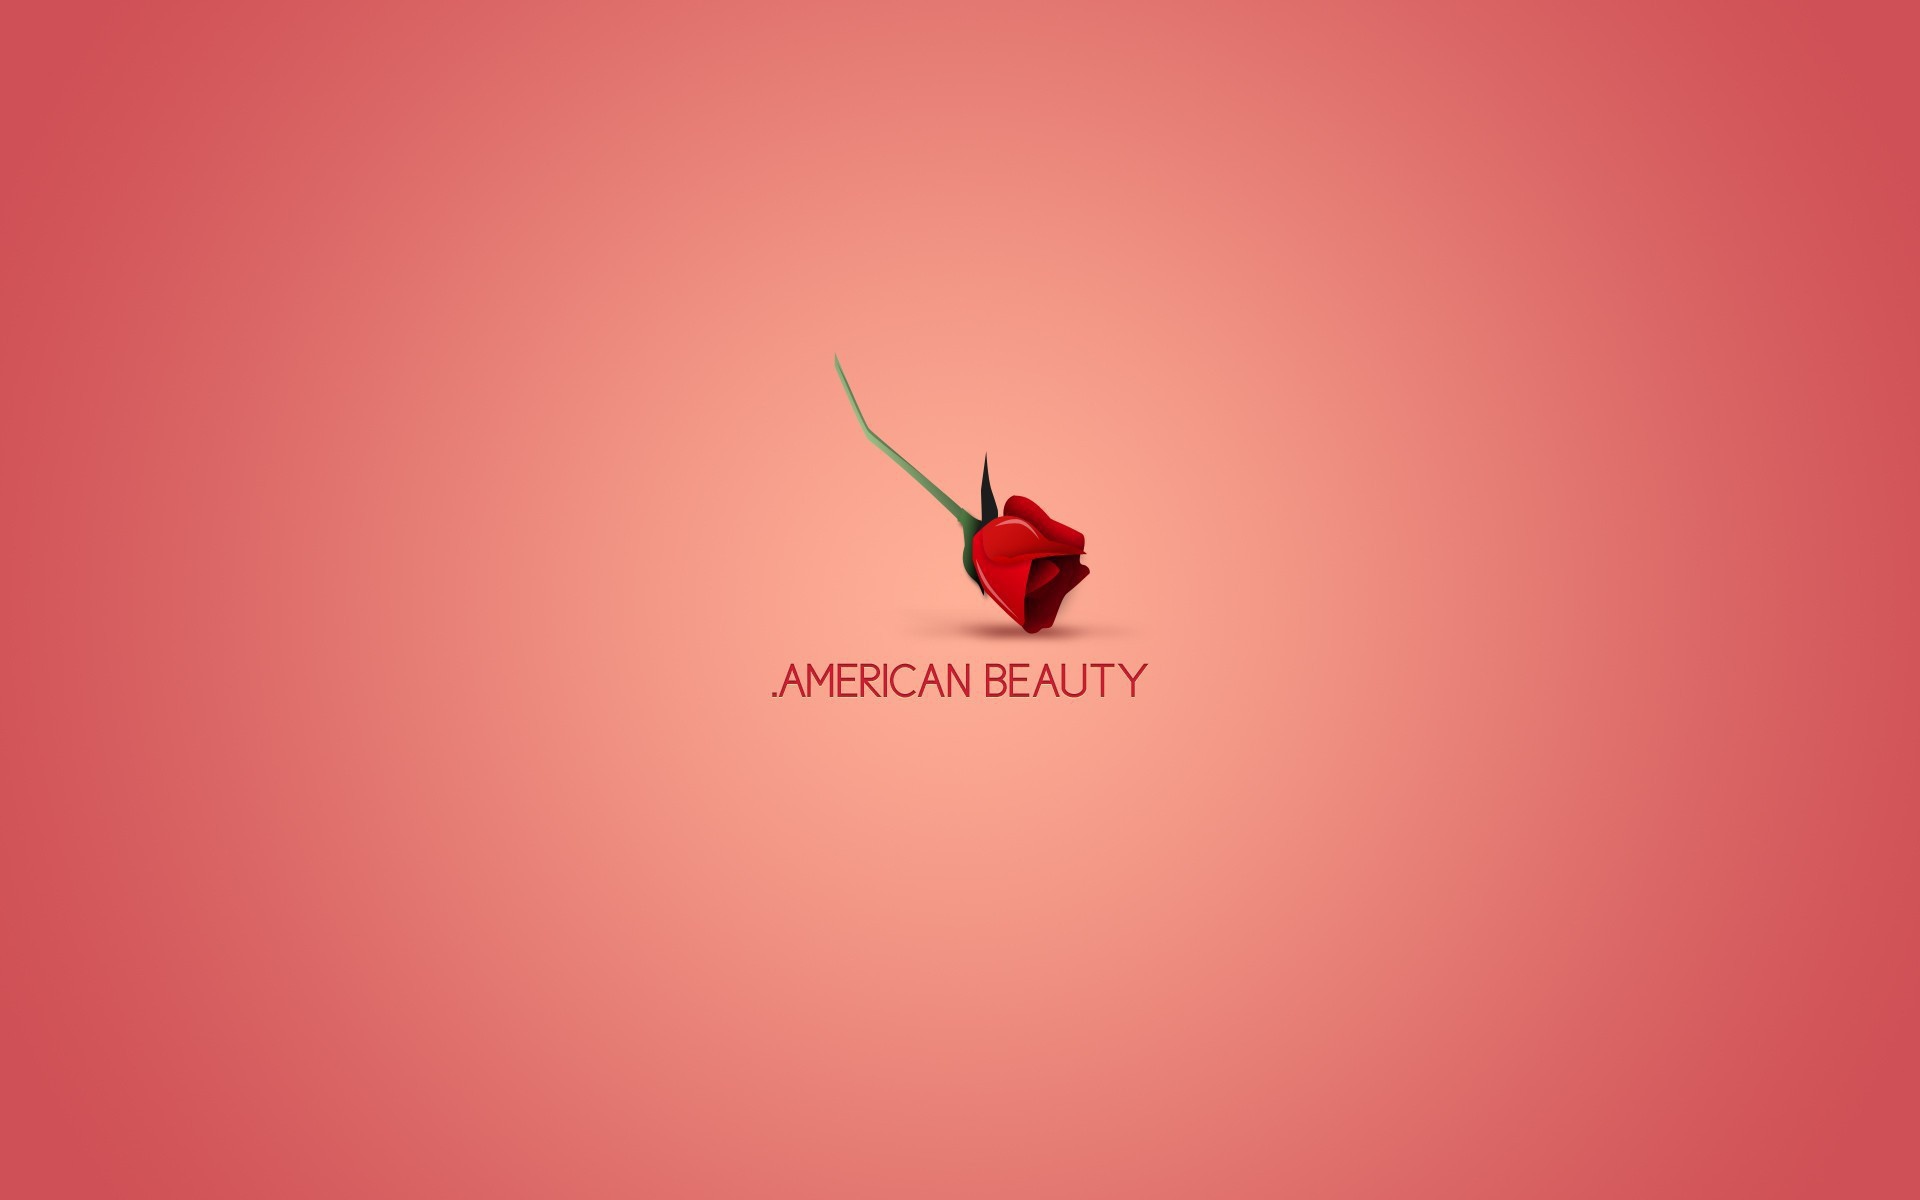 The poster of the film American Beauty